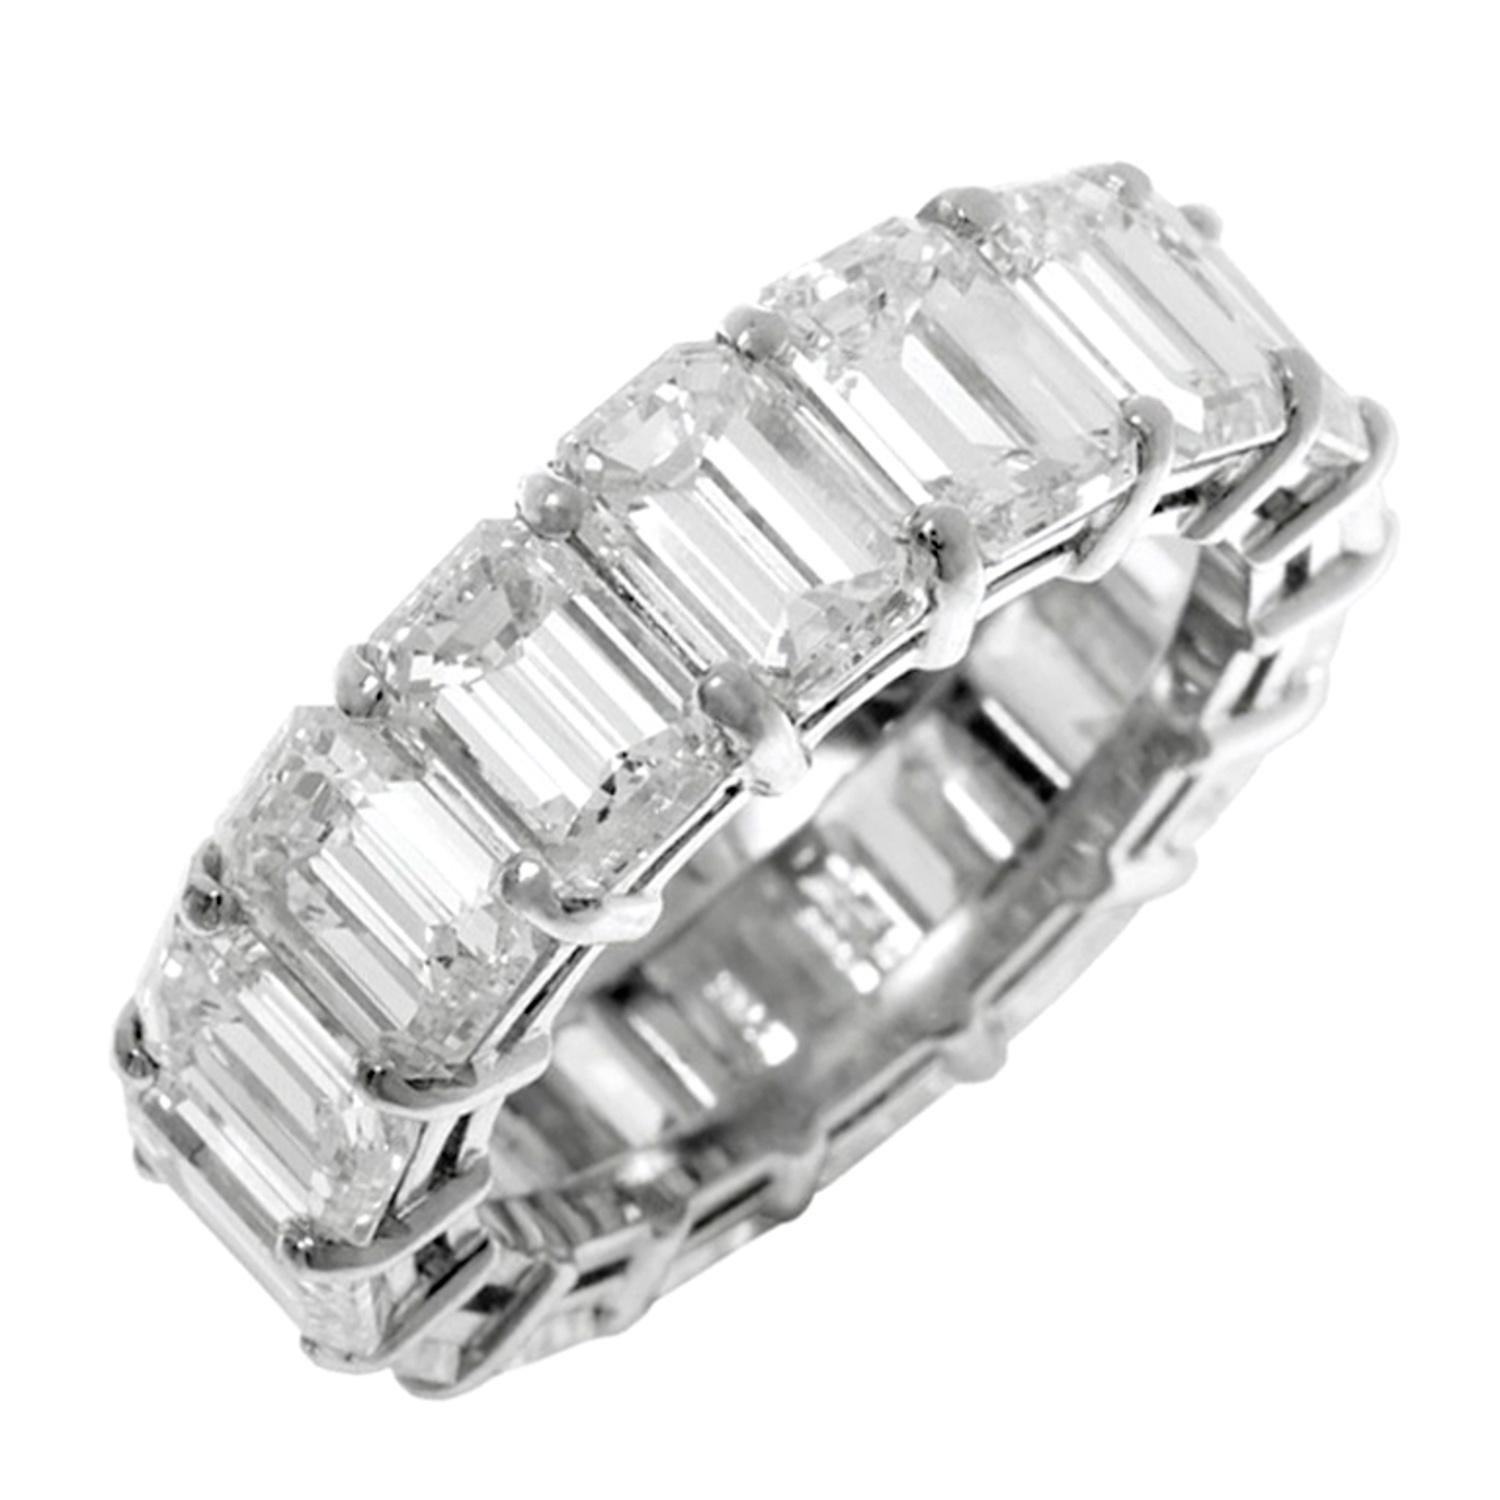 PLATINUM ETERNITY DIAMOND WEDDING BAND GIA CERTIFIED  WITH 14.10CT OF 14 EMERALD CUT DIAMONDS.
Diana M. is a leading supplier of top-quality fine jewelry for over 35 years.
Diana M is one-stop shop for all your jewelry shopping, carrying line of